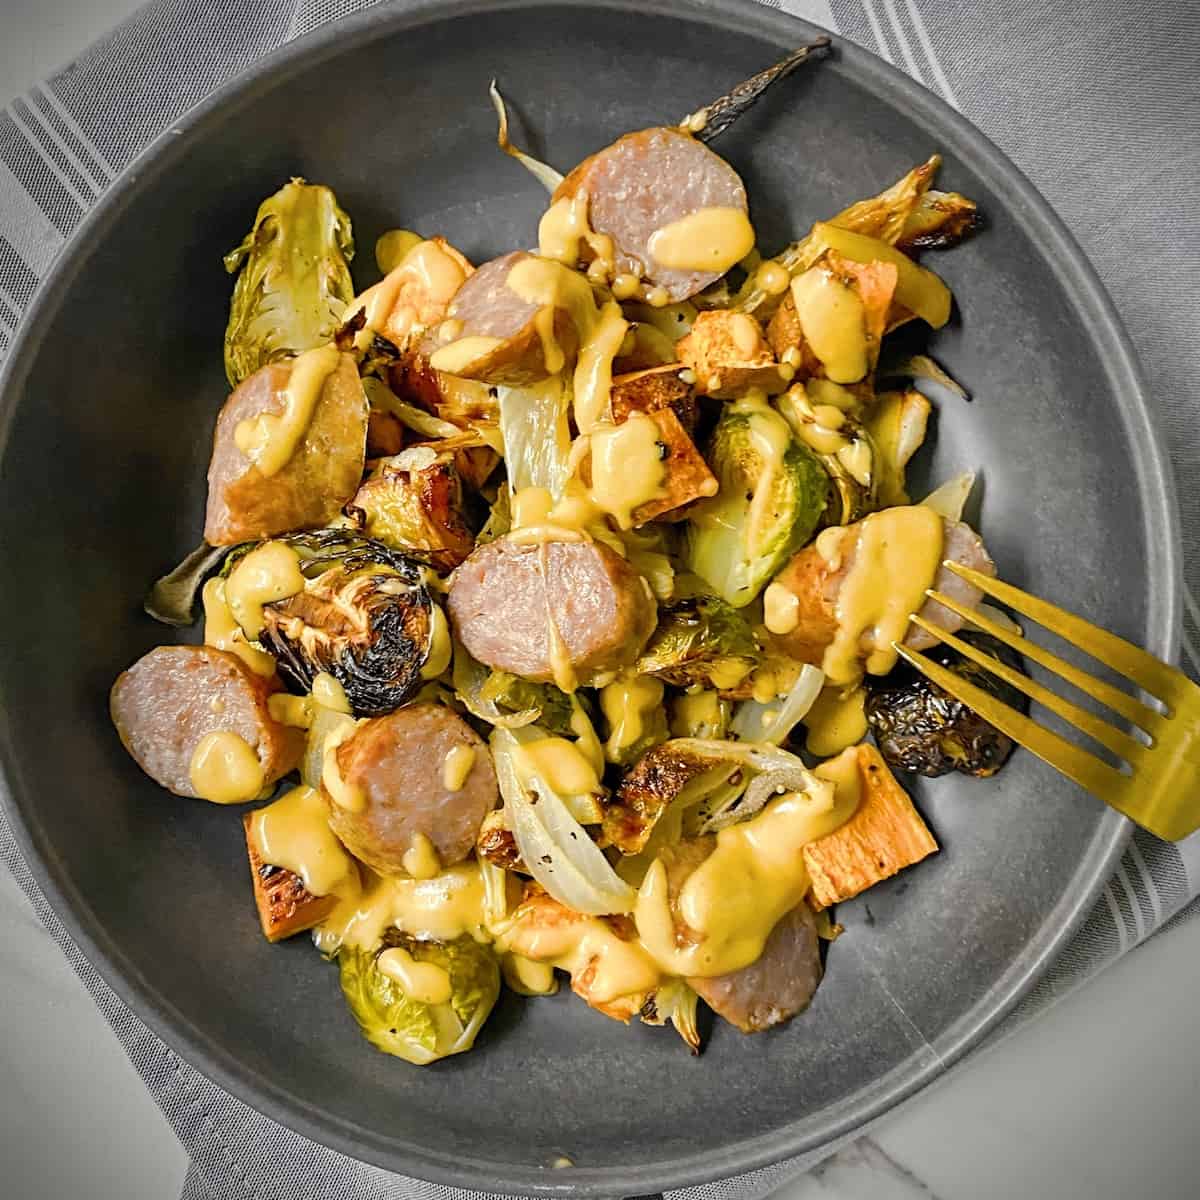 Autumn Sausage Veggie and Apple Sheet Pan Dinner - Cooking Classy